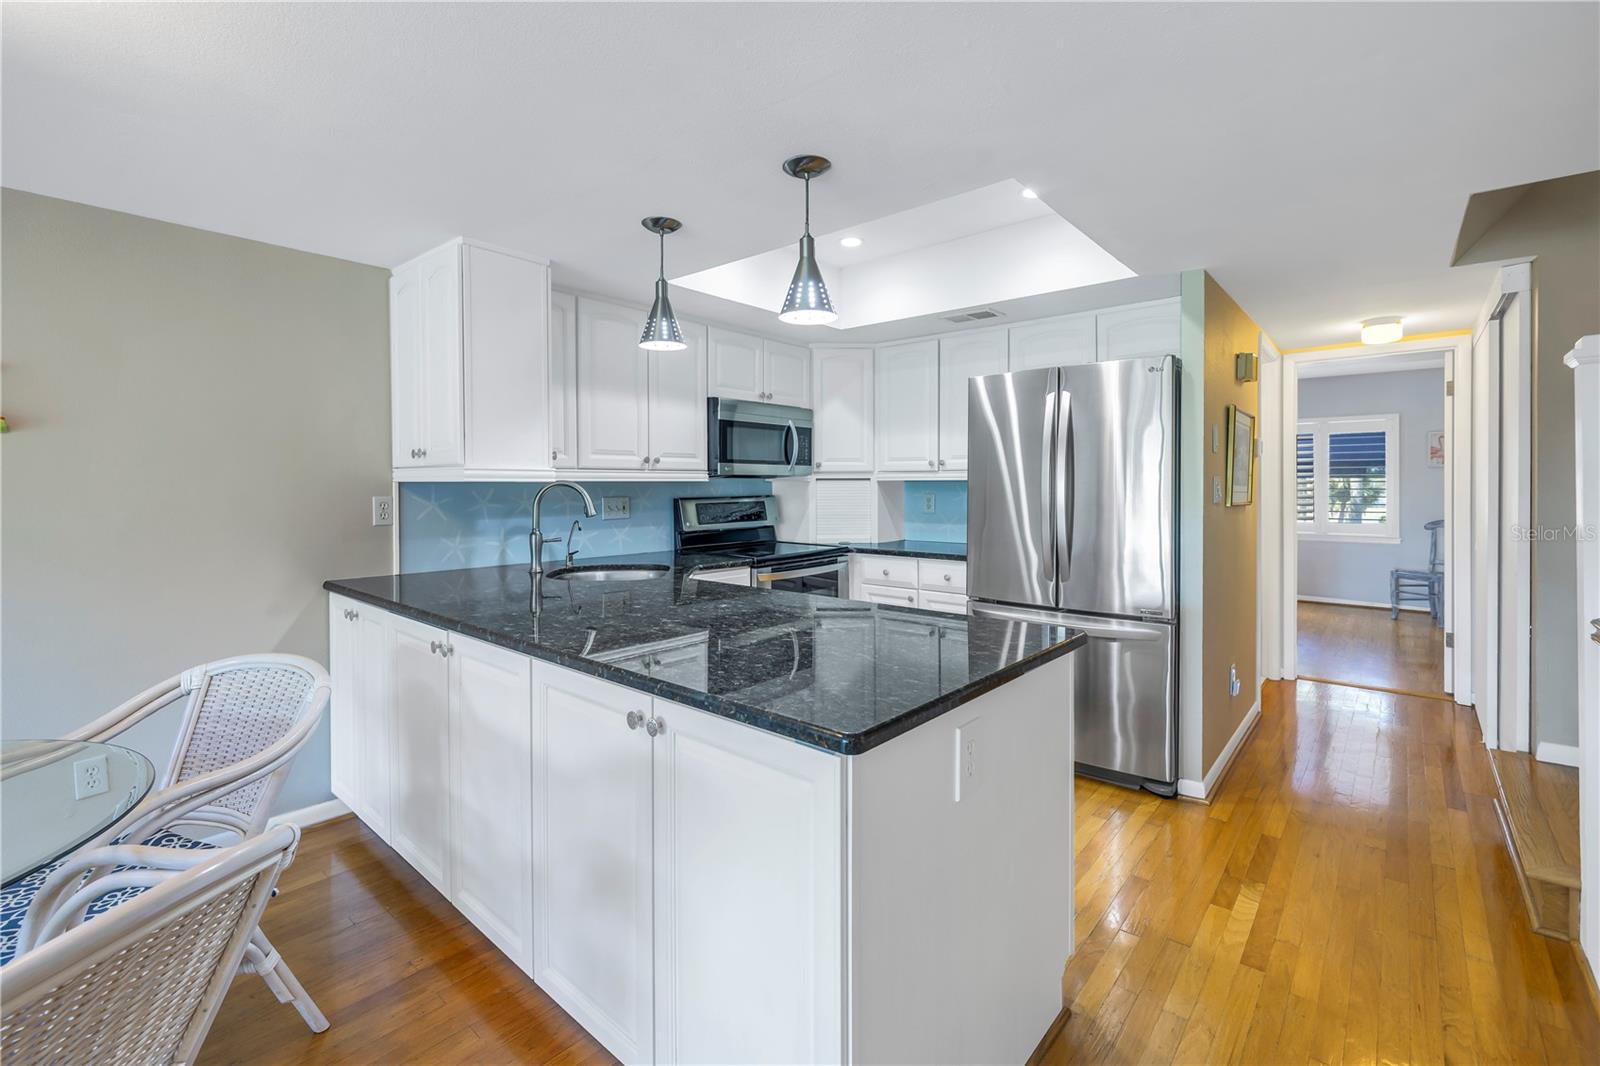 Stainless LG appliances and granite counters